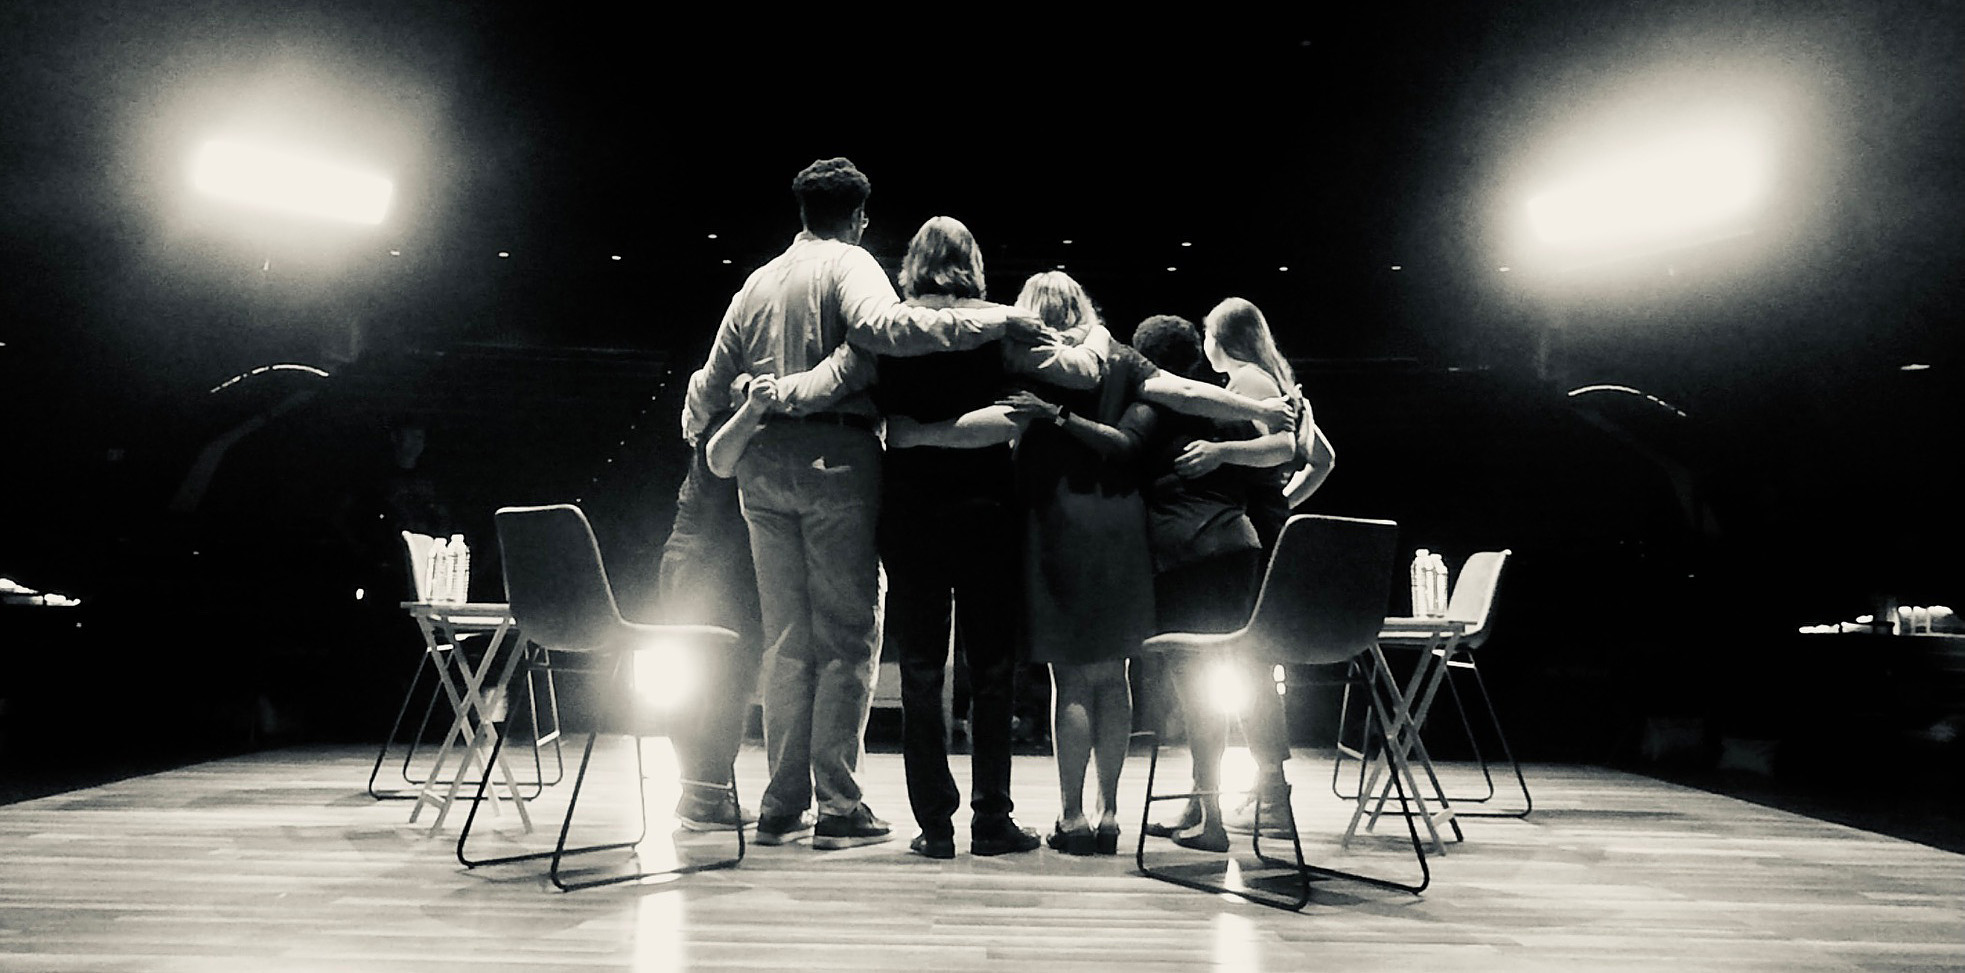 Black and white photograph of 5 people standing on stage with their arms around each other. The photo is taken behind the people, looking out at a theater.